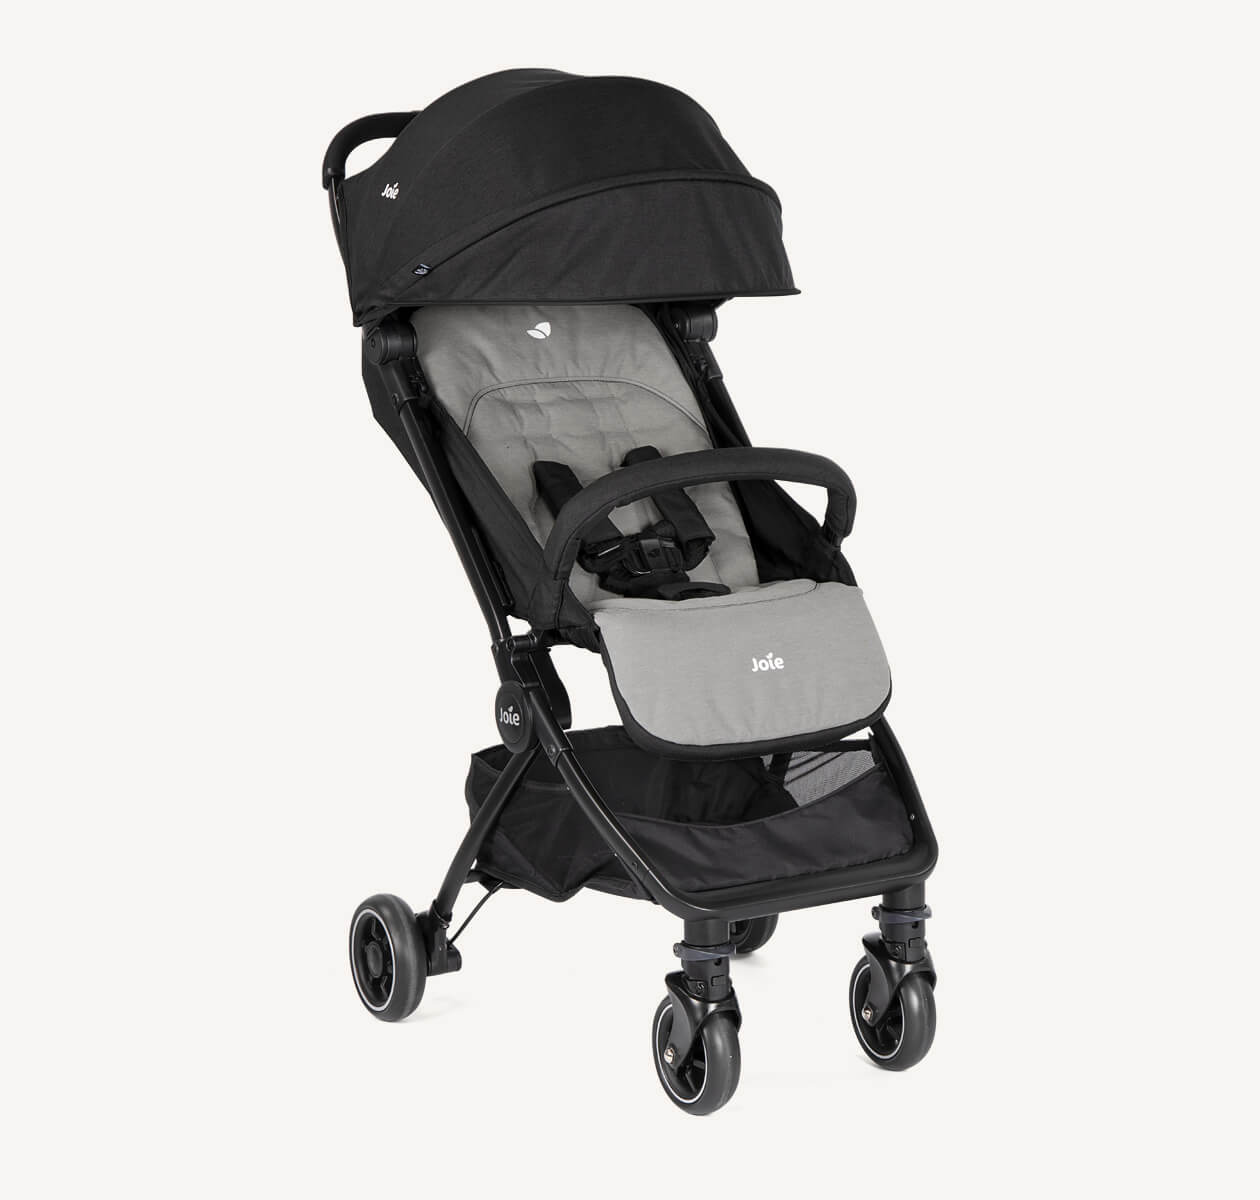 https://dd.joiebaby.com/media/catalog/product/p/1/p1-joie-lightweightandtravel-pact-ember-right-angle.jpg?type=product&height=265&width=265